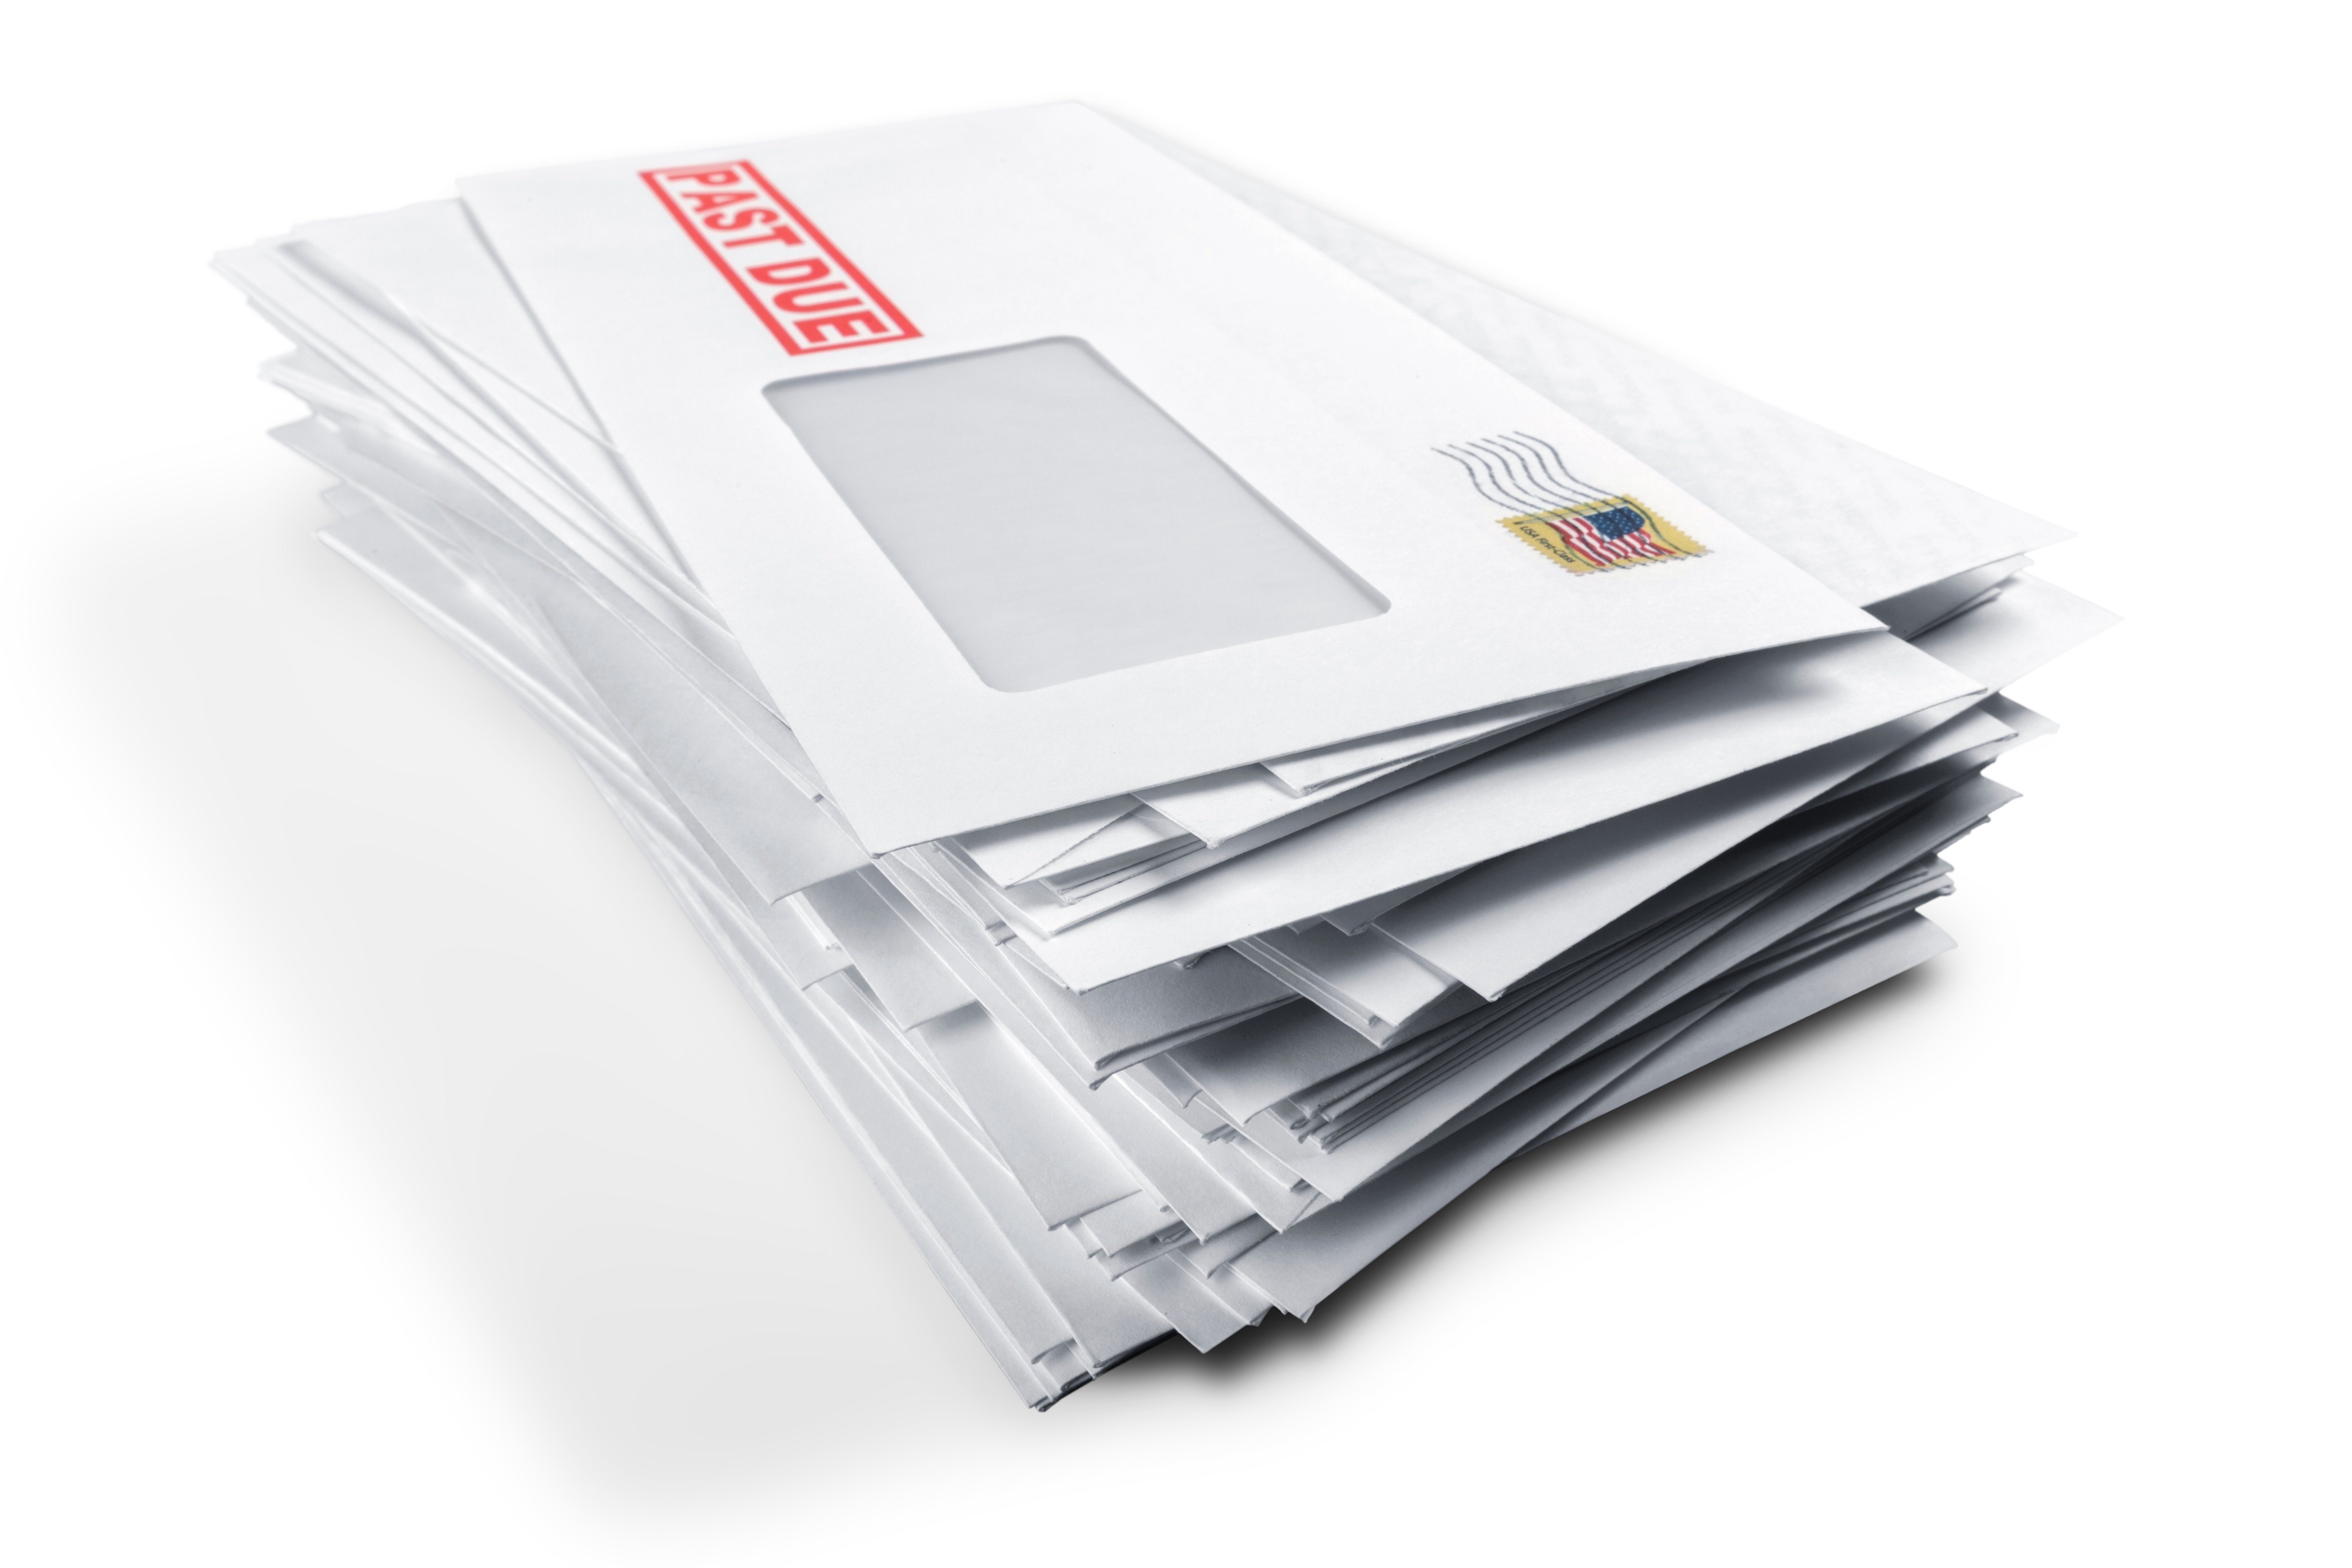 An image of a stack of envelops with postage on them placed on there by a postage meter for lease.